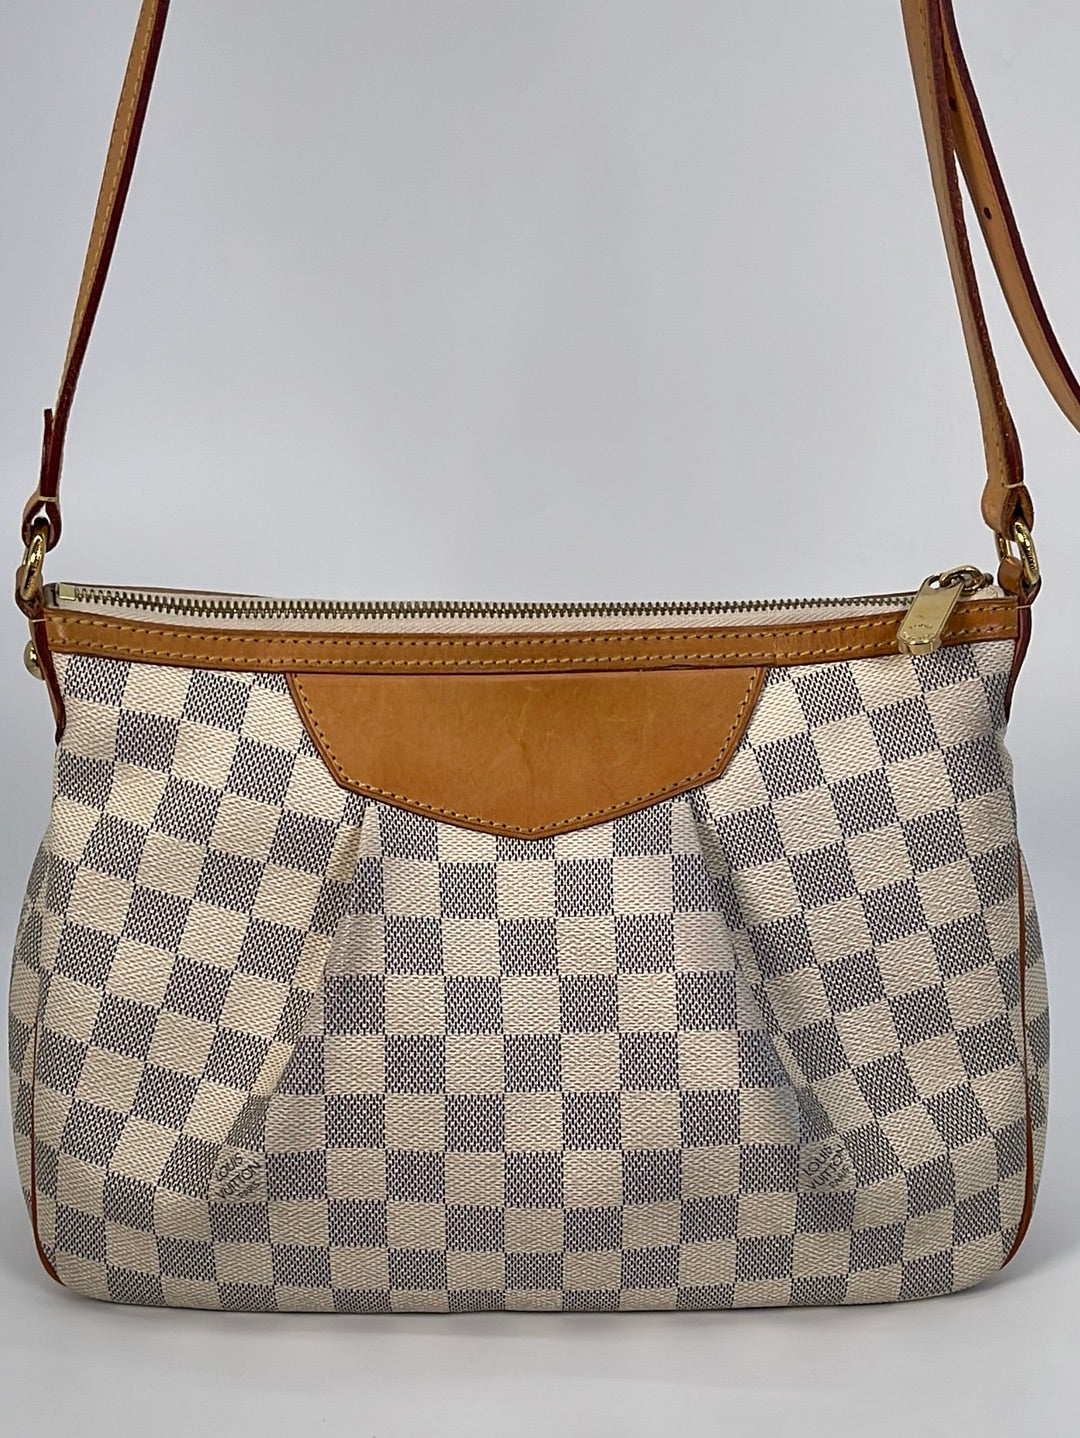 Authenticated Used Auth Louis Vuitton Damier Azur Siracusa PM N41113  Women's Shoulder Bag 